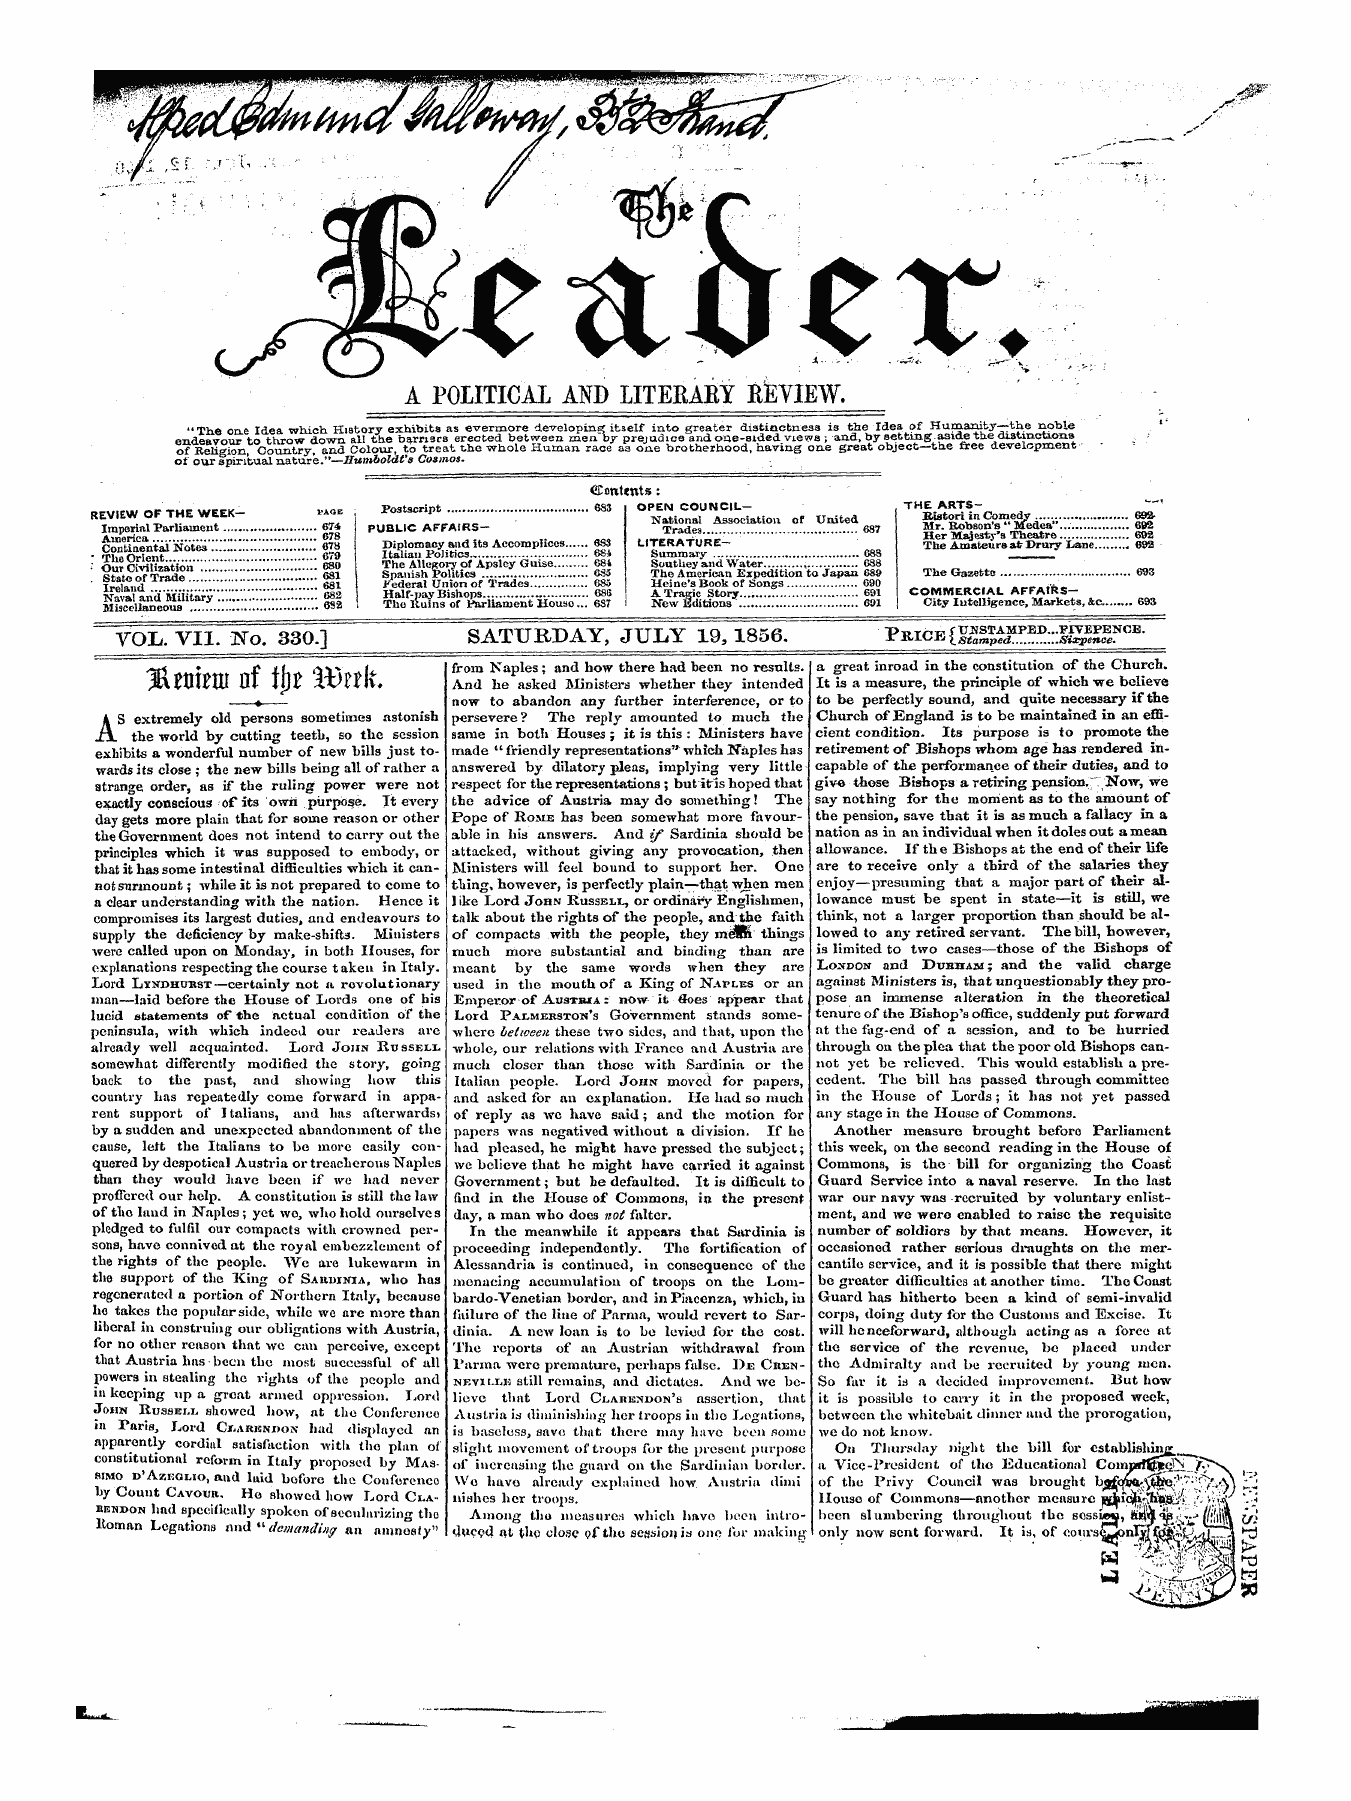 Leader (1850-1860): jS F Y, 1st edition - Contents :